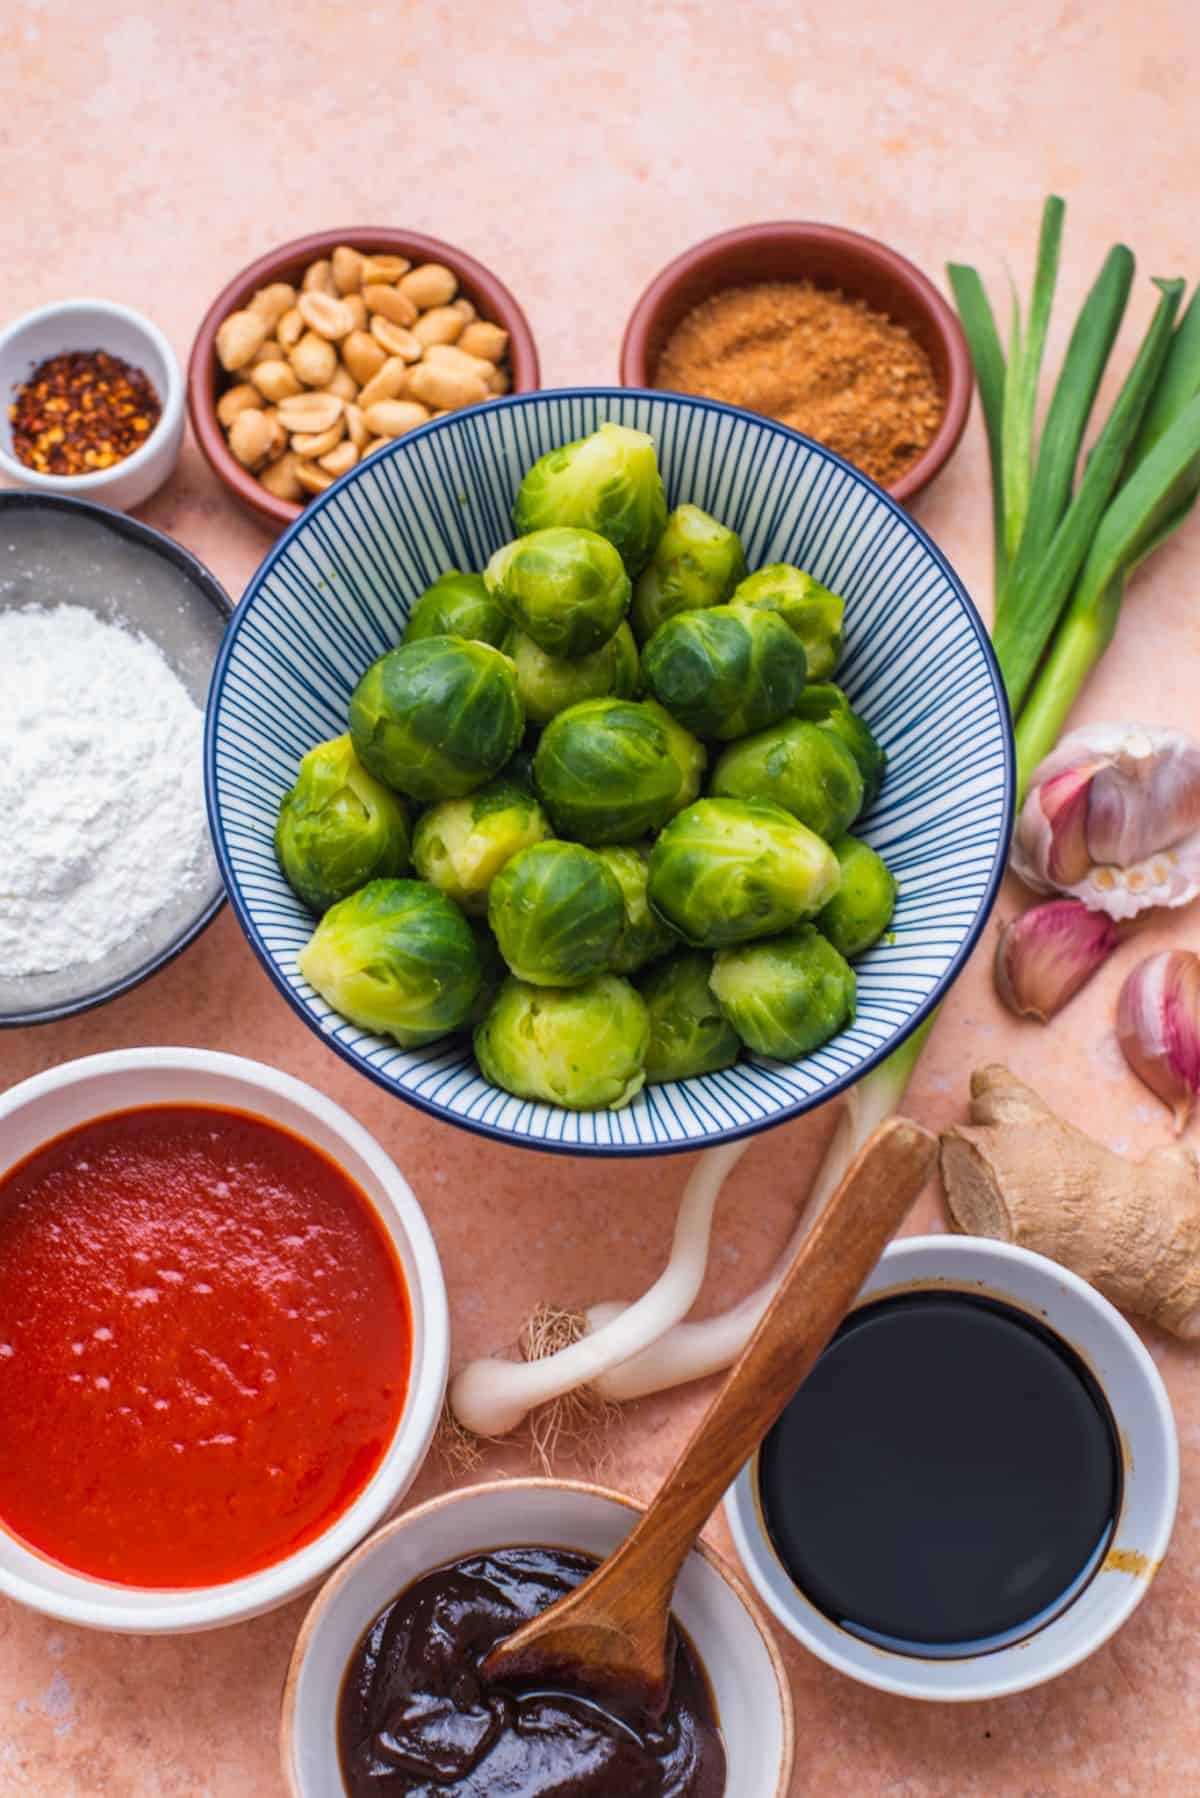 Kung pao brussel sprouts ingredients